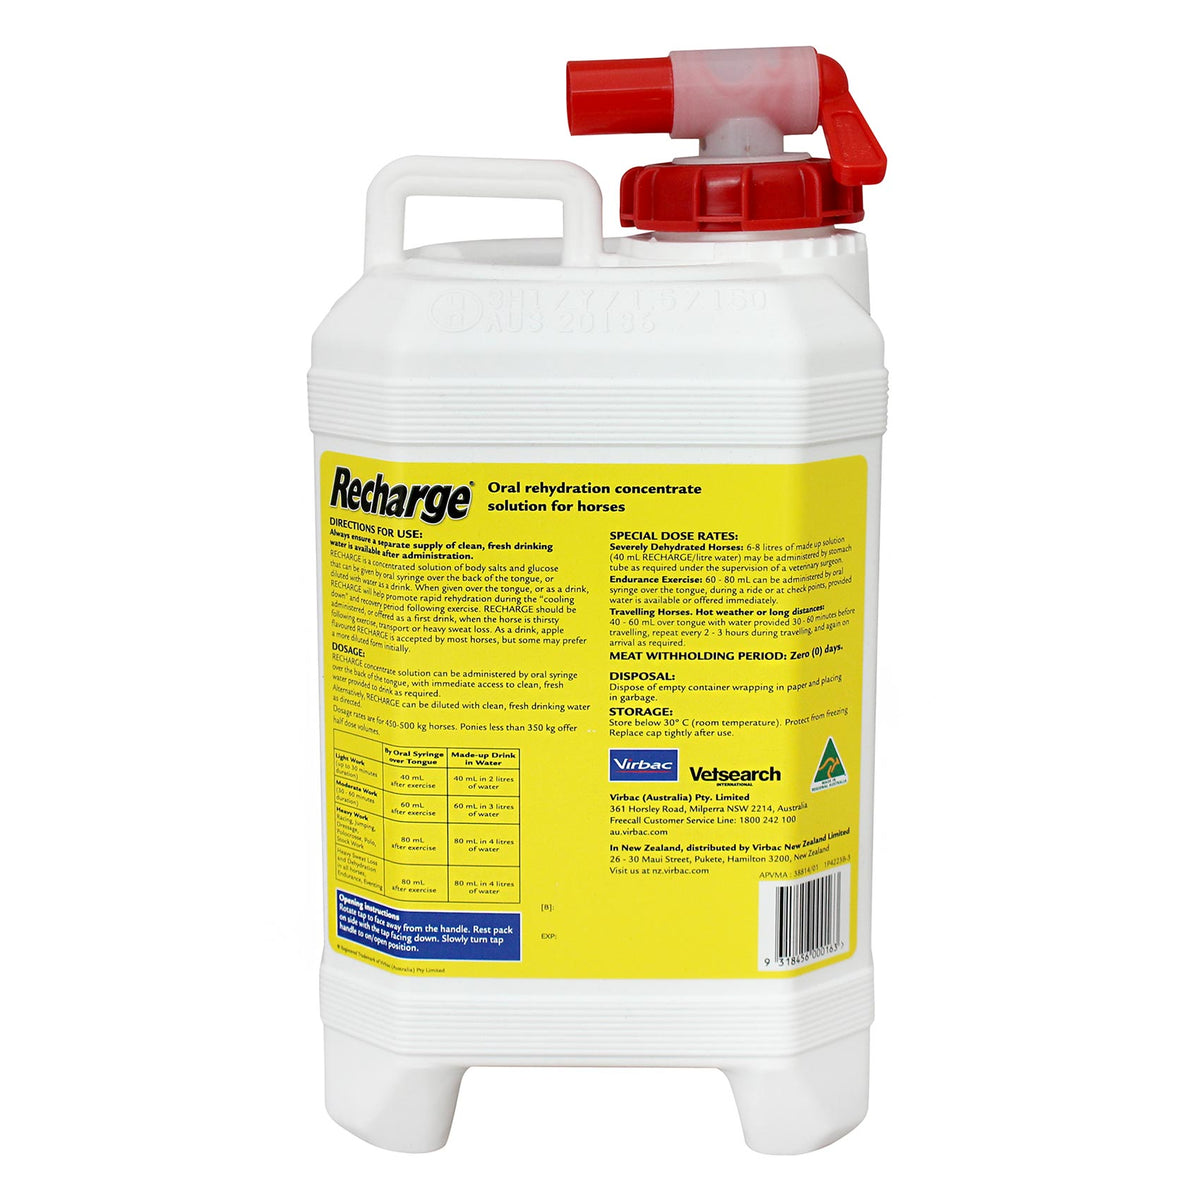 Recharge Electrolyte Liquid for Horses